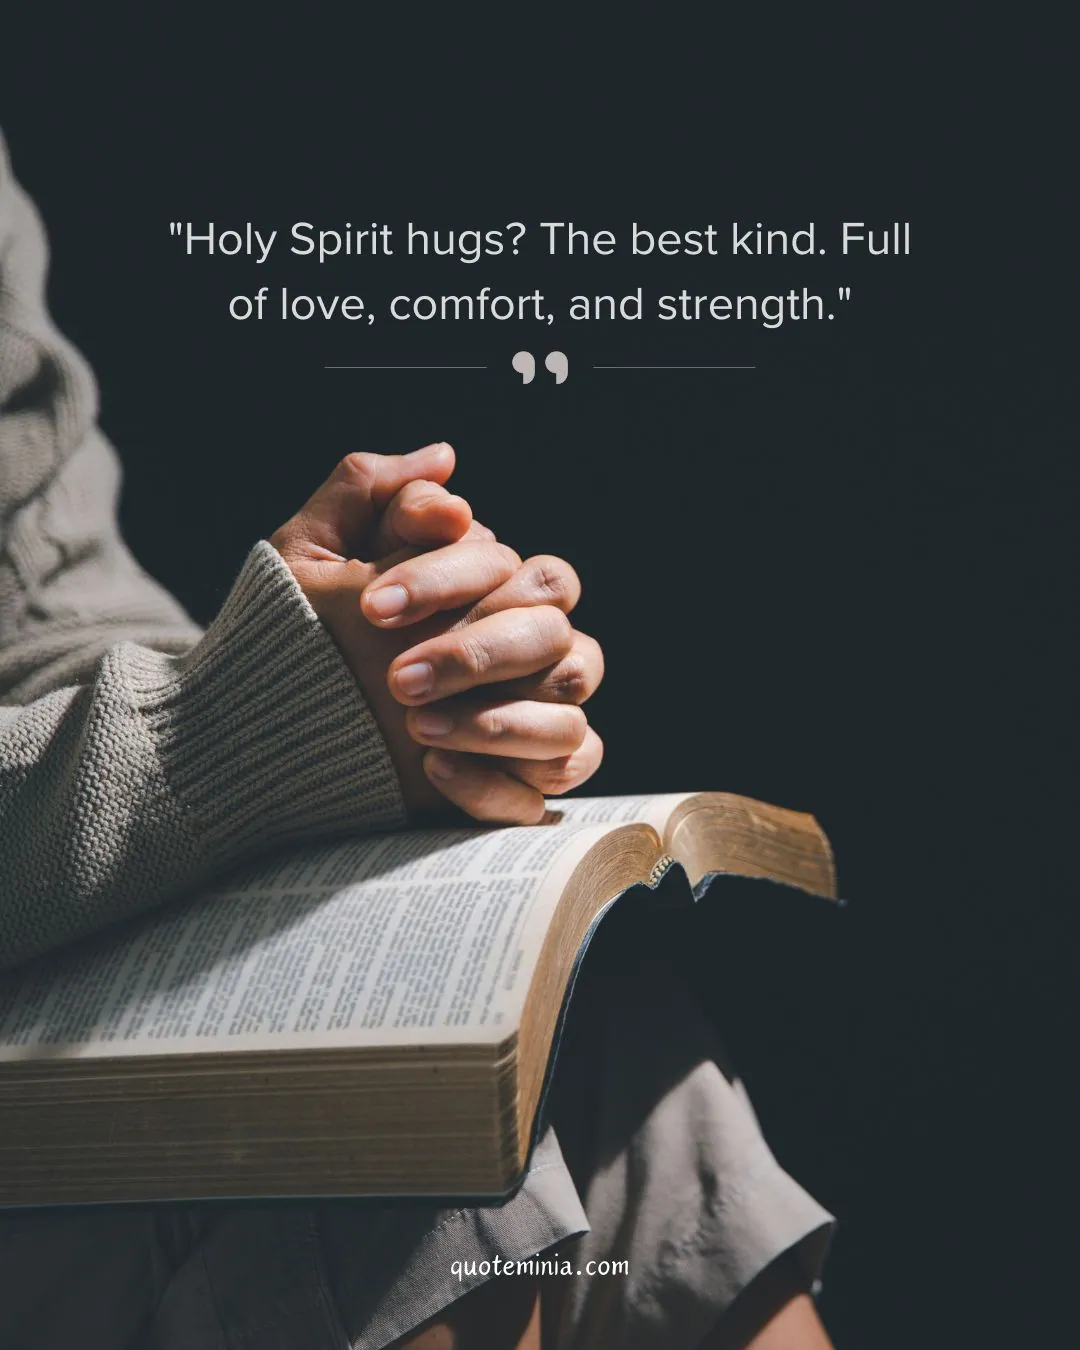 Quotes About The Holy Spirit image 2